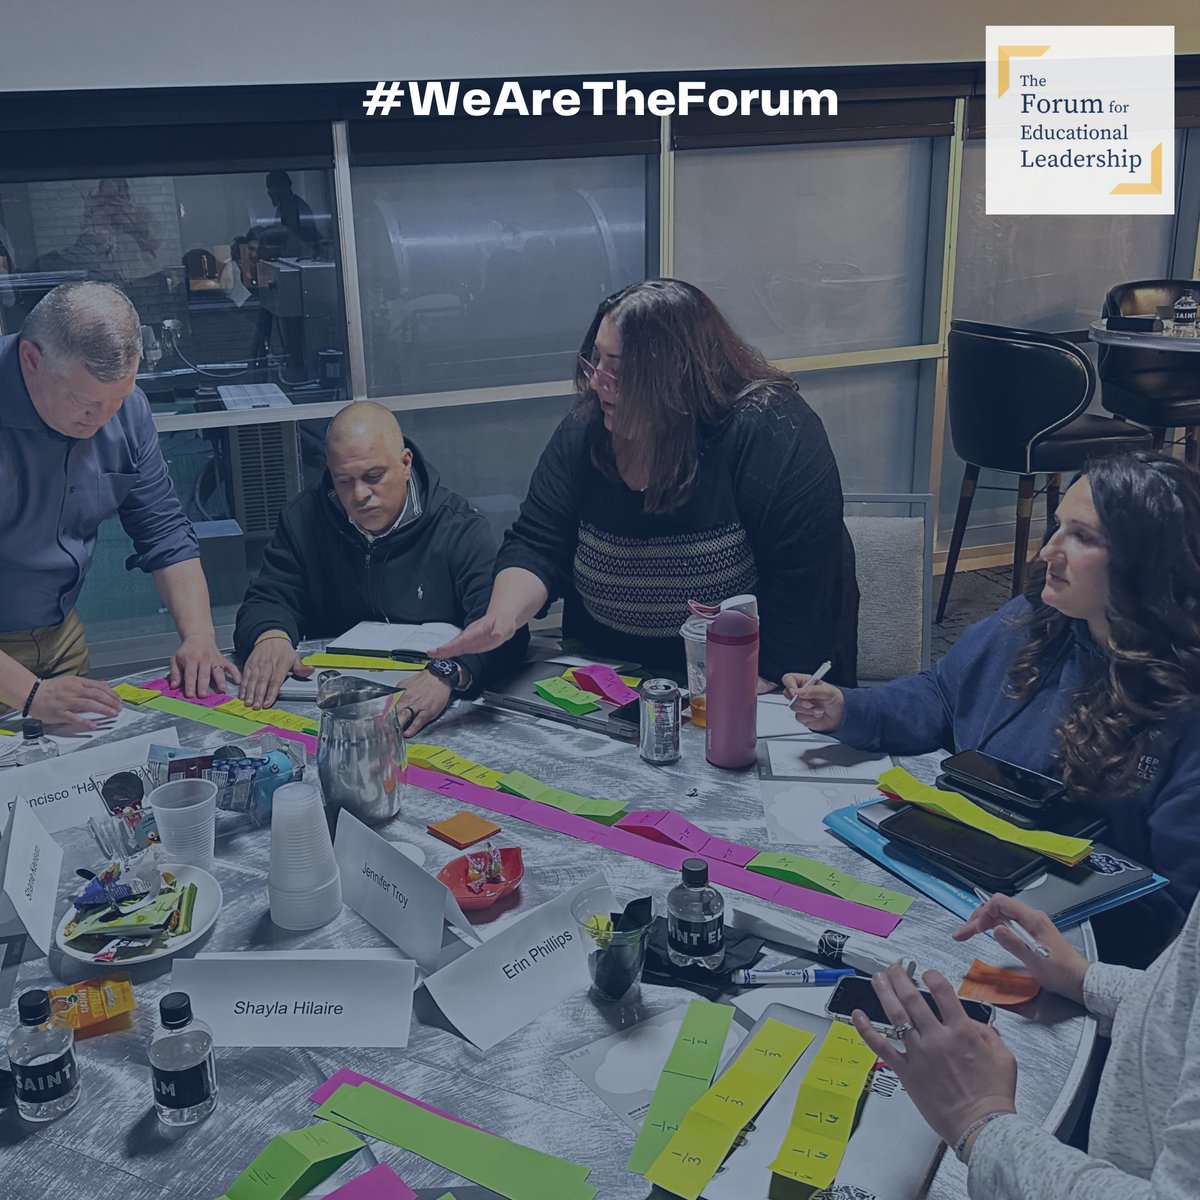 #WeAreTheForum is the largest growing national network for district and state education leaders to collectively impact students. At #WeAreTheForum, we provide research-backed training, expert supports, and a network to help advance your goals. #LeadershipMatters #WomenLeadingEd